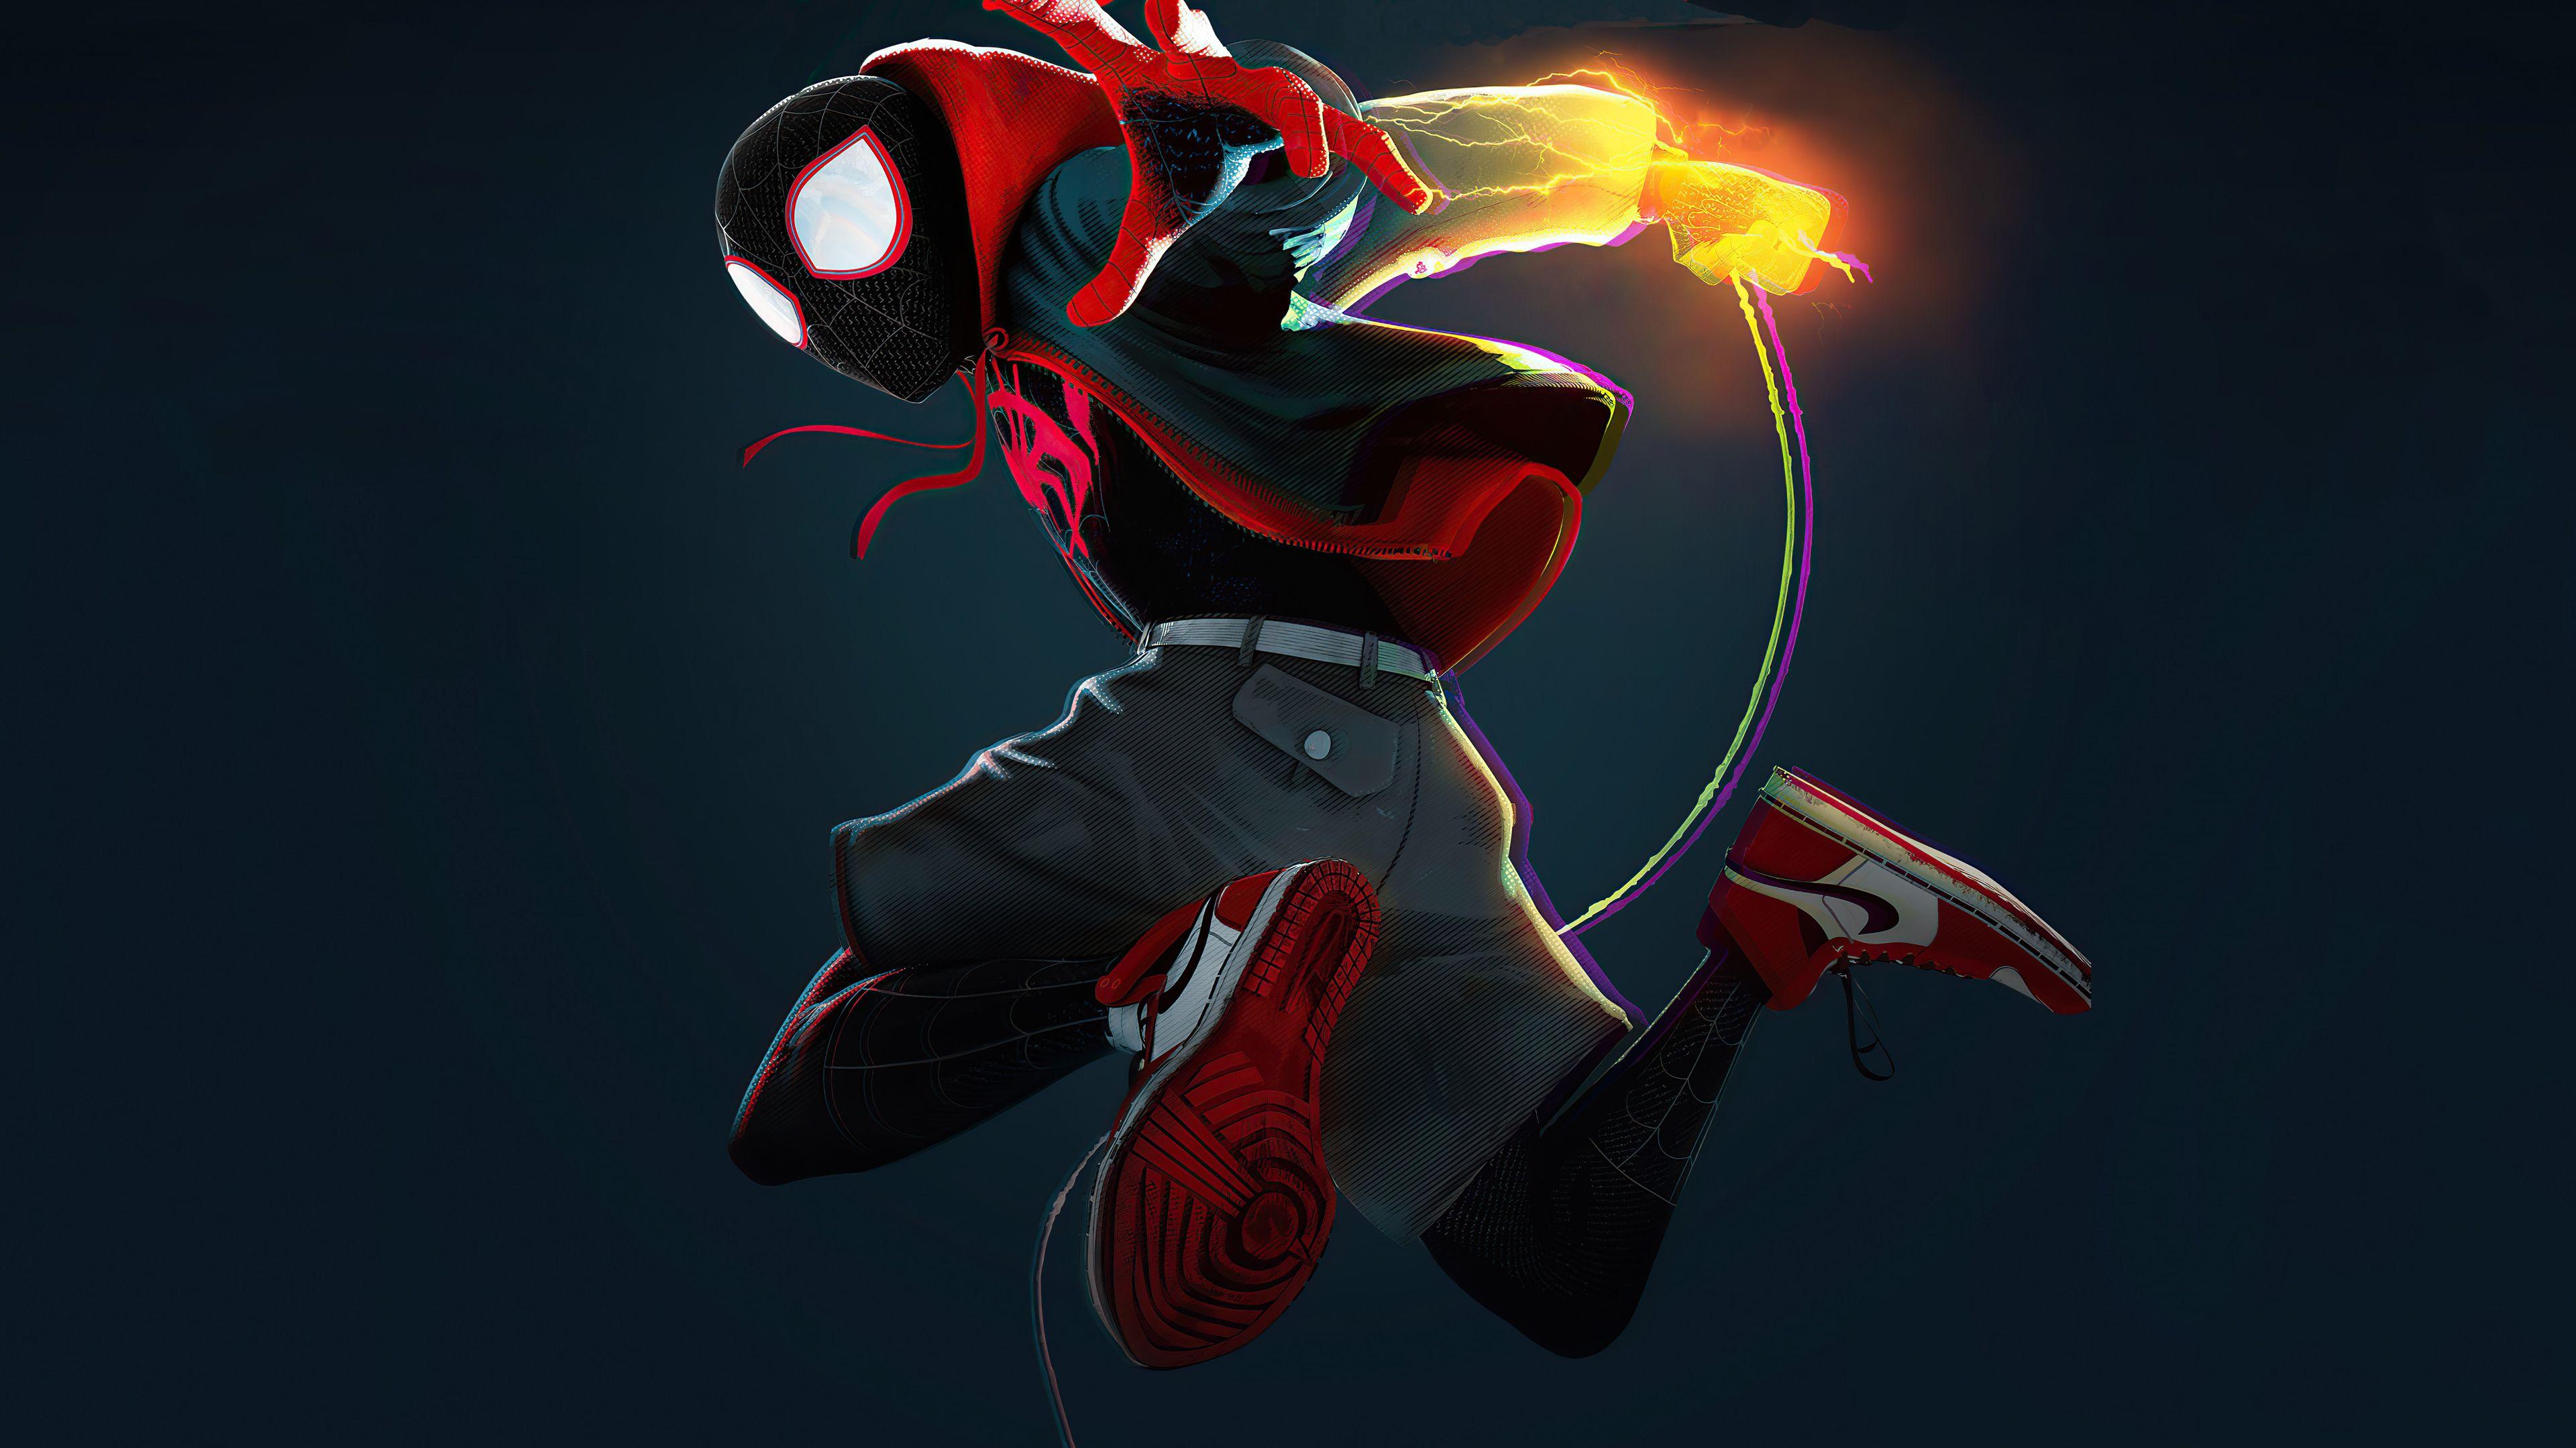 HD wallpaper Movie SpiderMan Into The SpiderVerse Miles Morales  Pixel Art  Wallpaper Flare